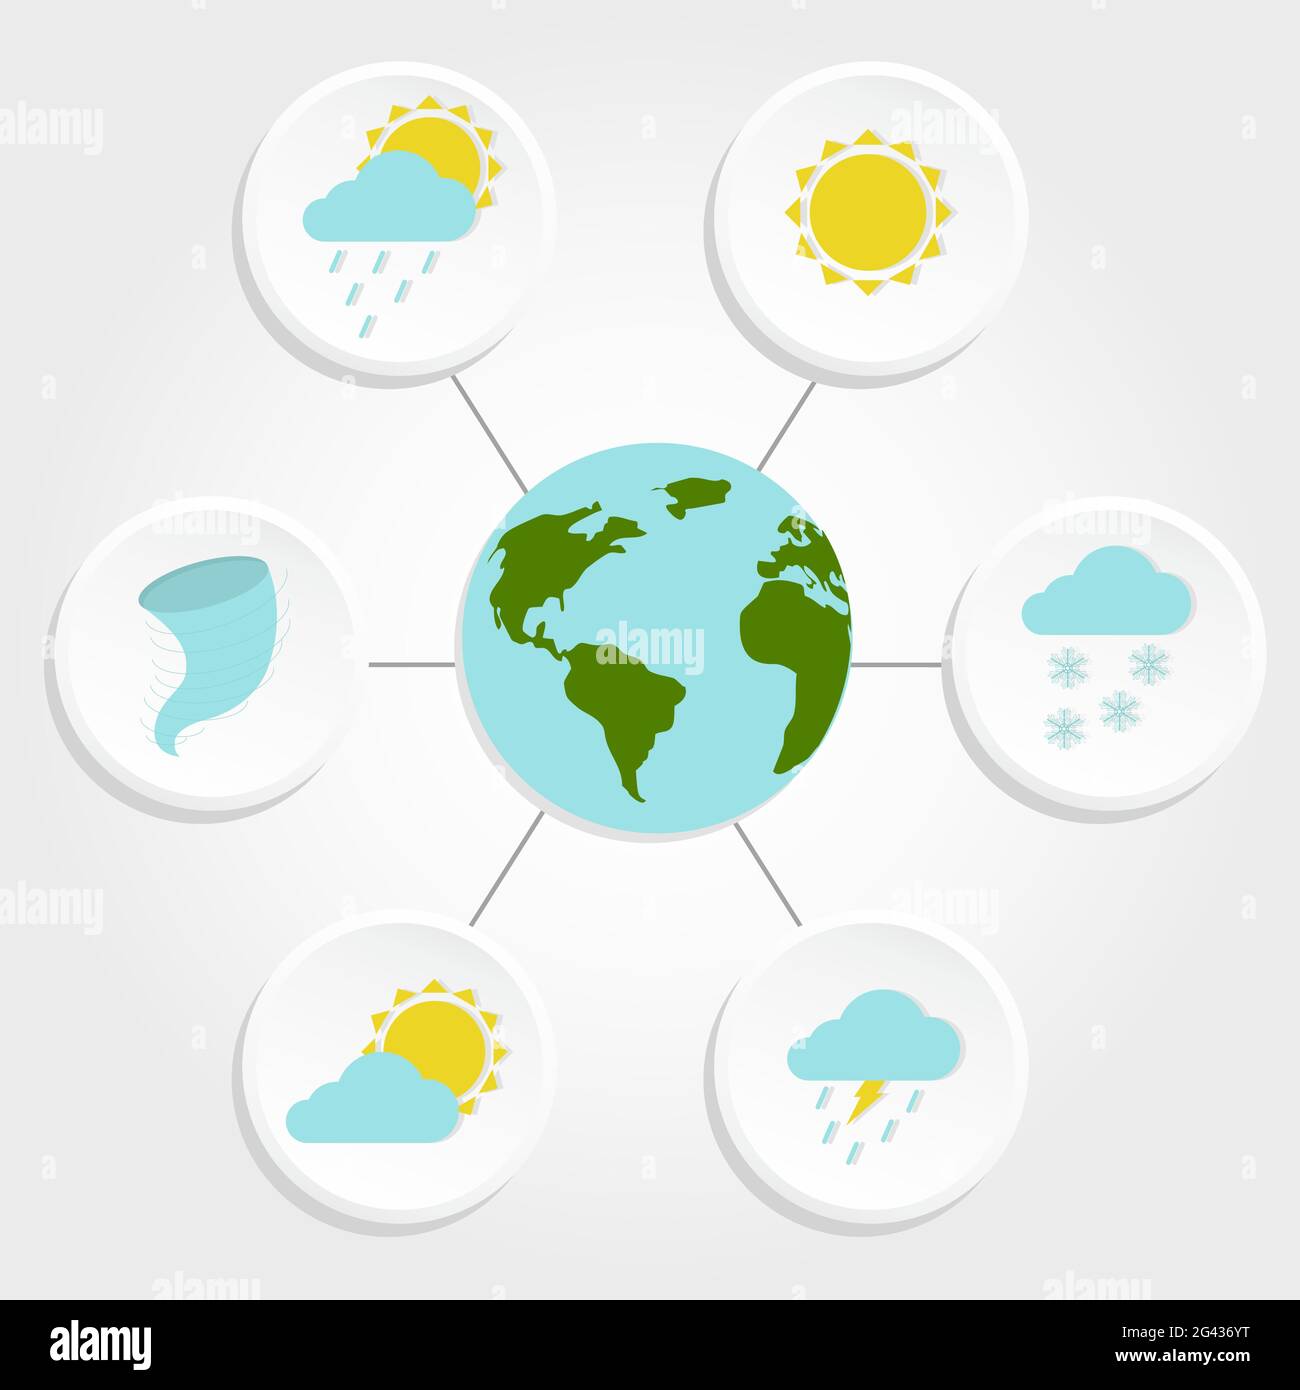 Diagram with different climates on the planet earth Stock Vector